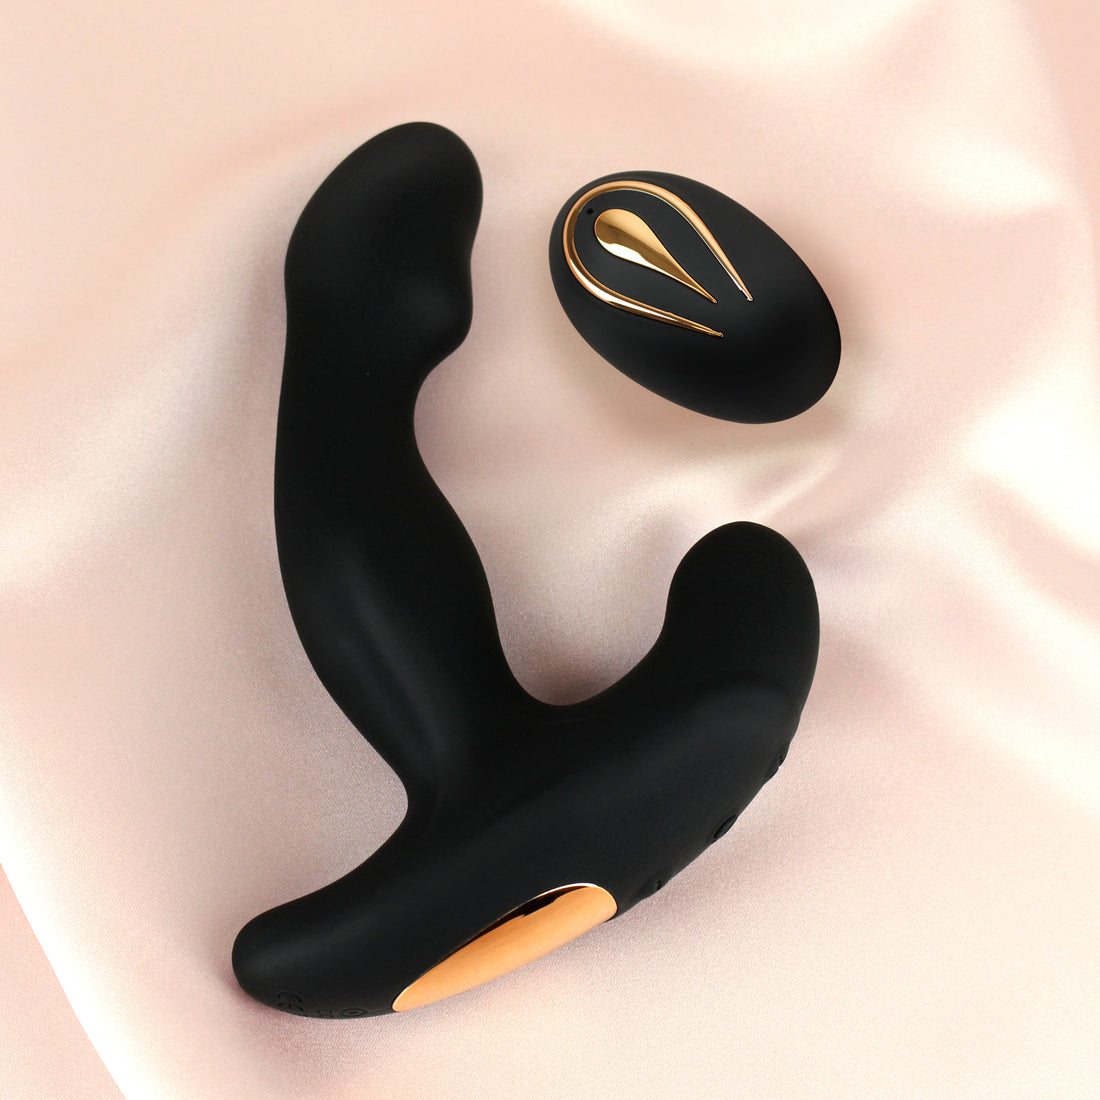 Owen - Prostate Massager with remote control – Black